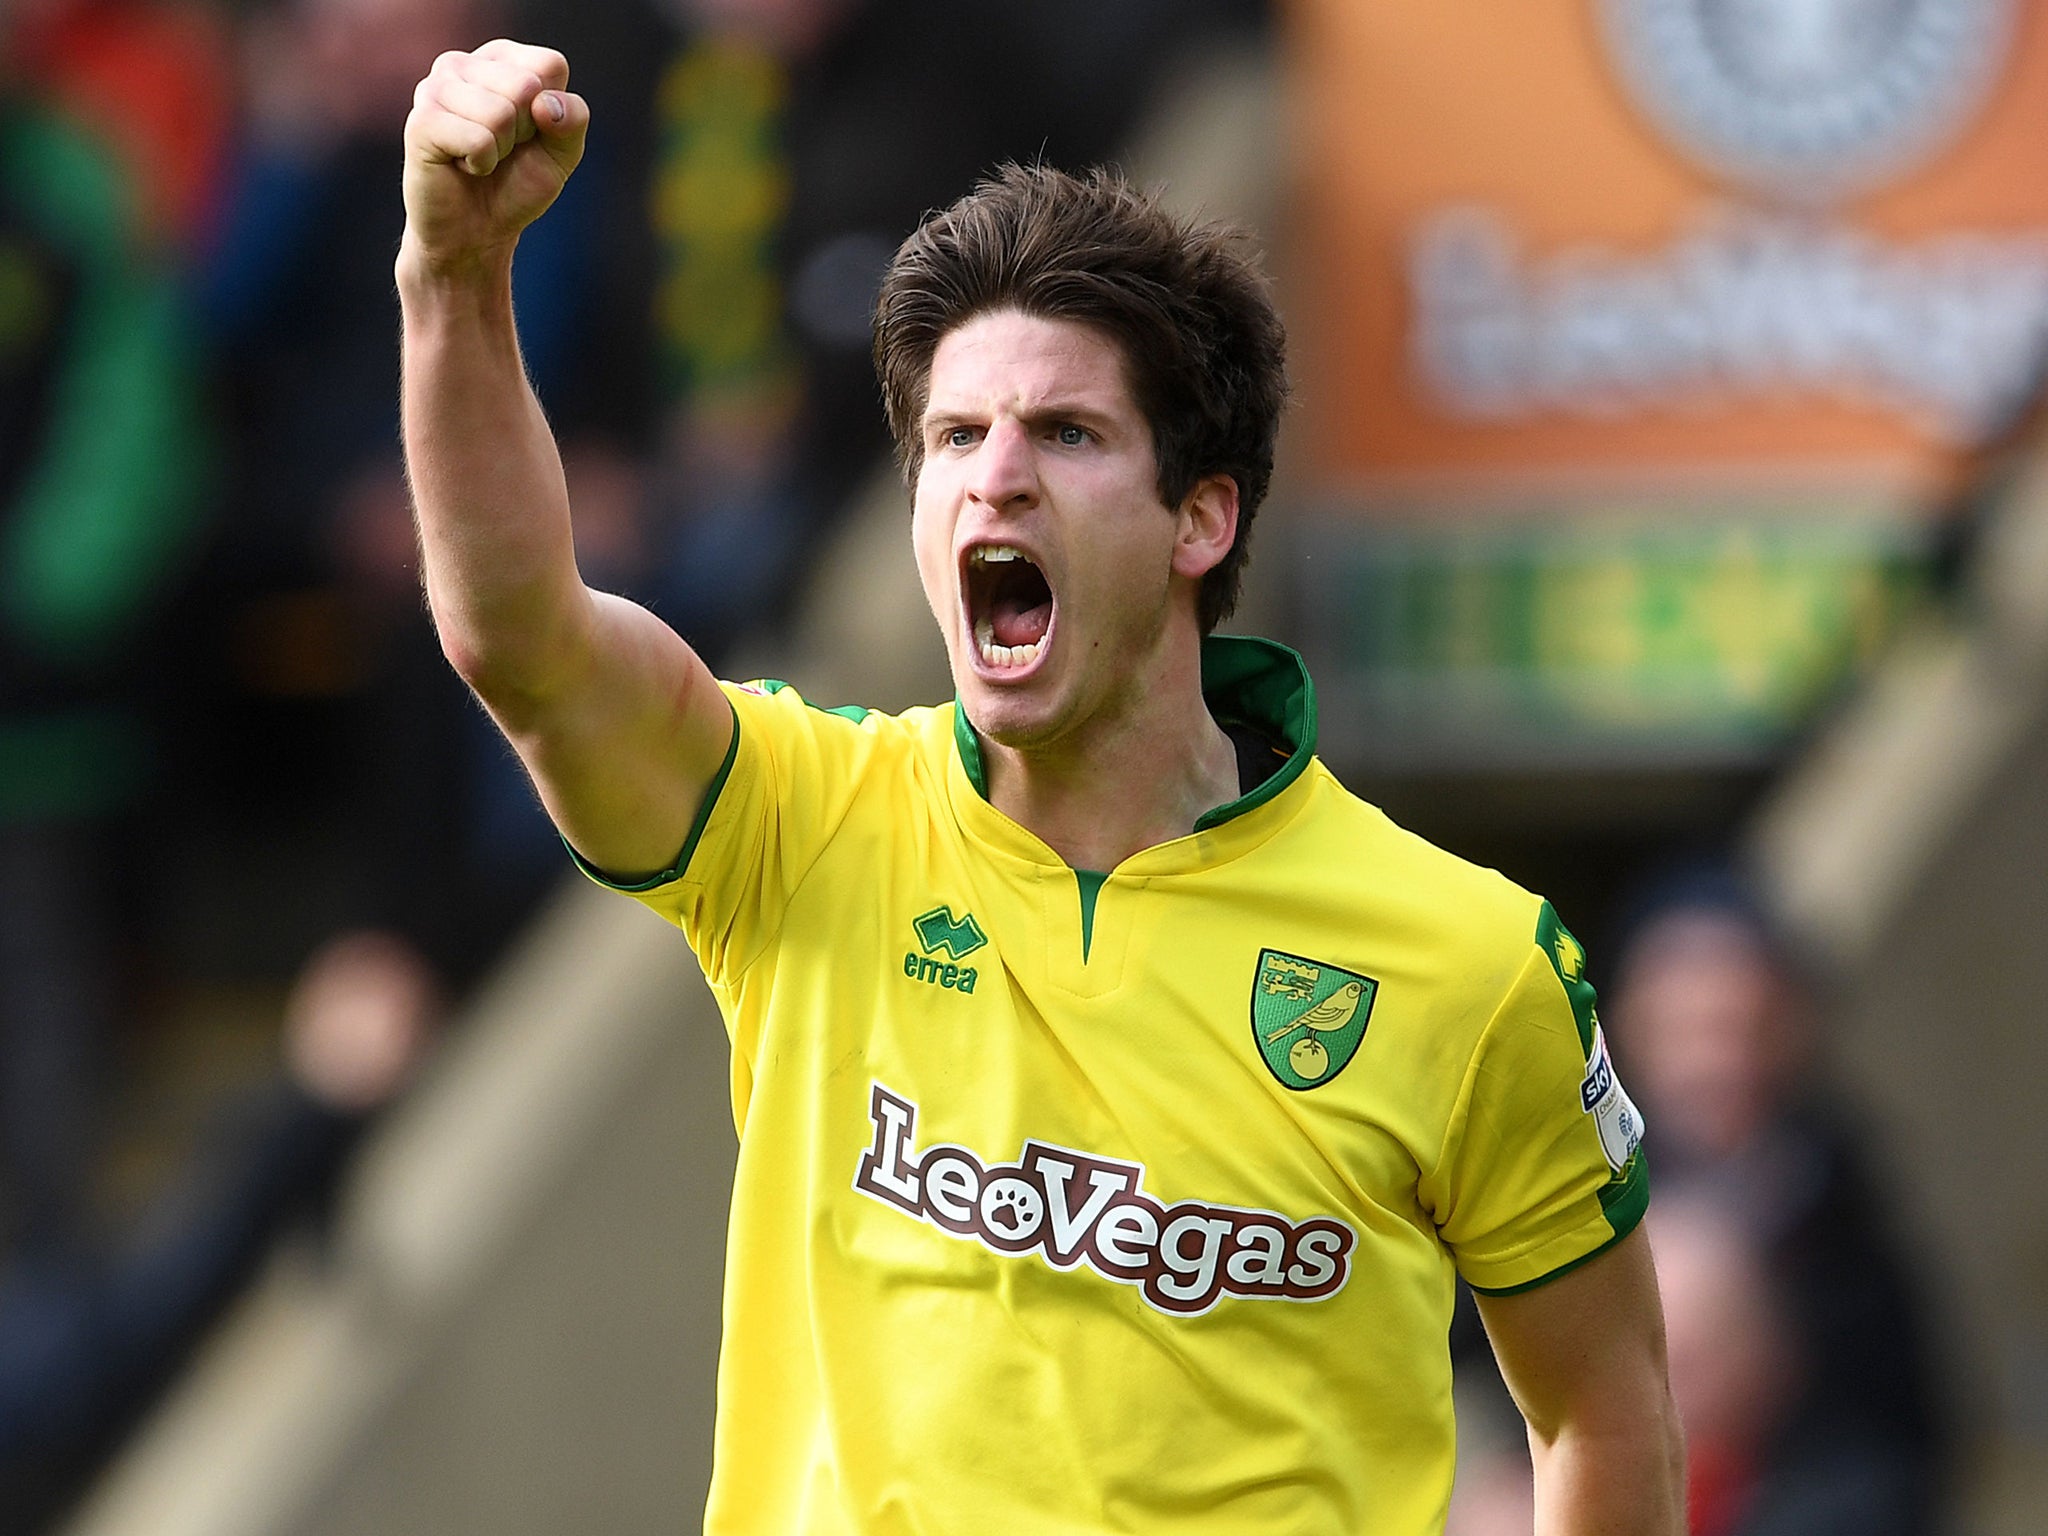 Timm Klose celebrates after Norwich's late equaliser against rivals Ipswich Town